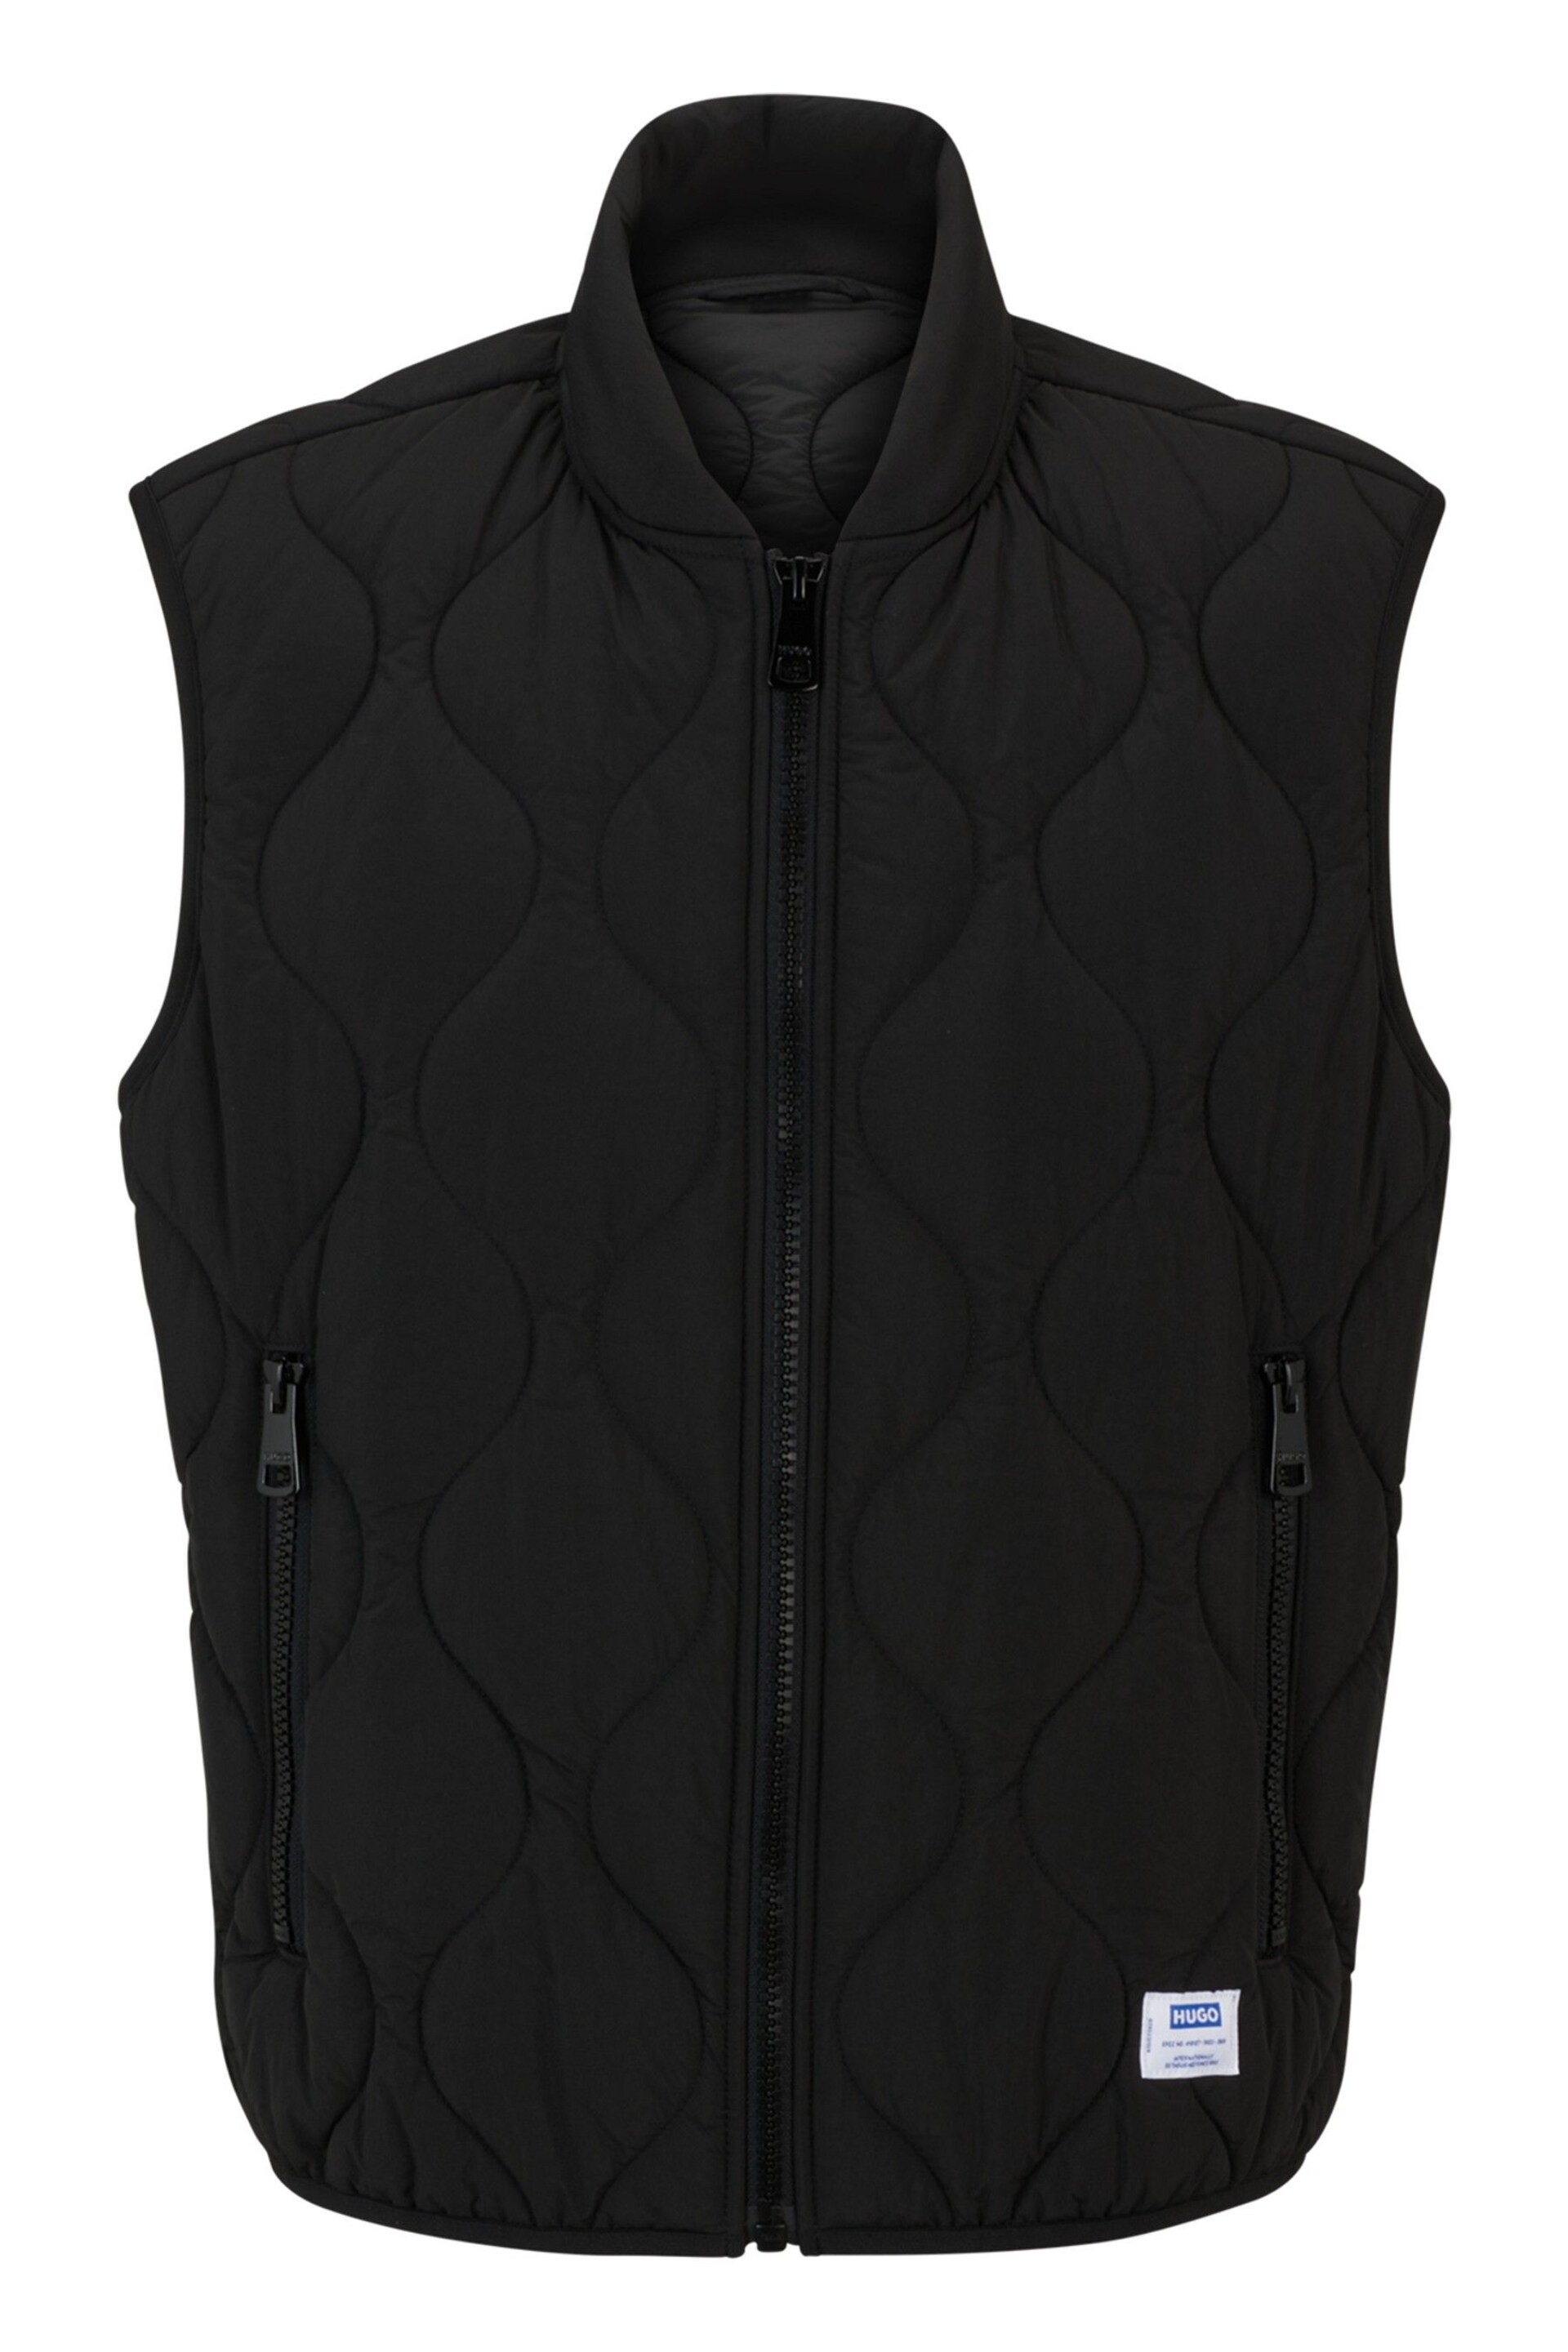 HUGO Water Repellent Diamond Quilted Logo Patch Gilet - Image 7 of 7